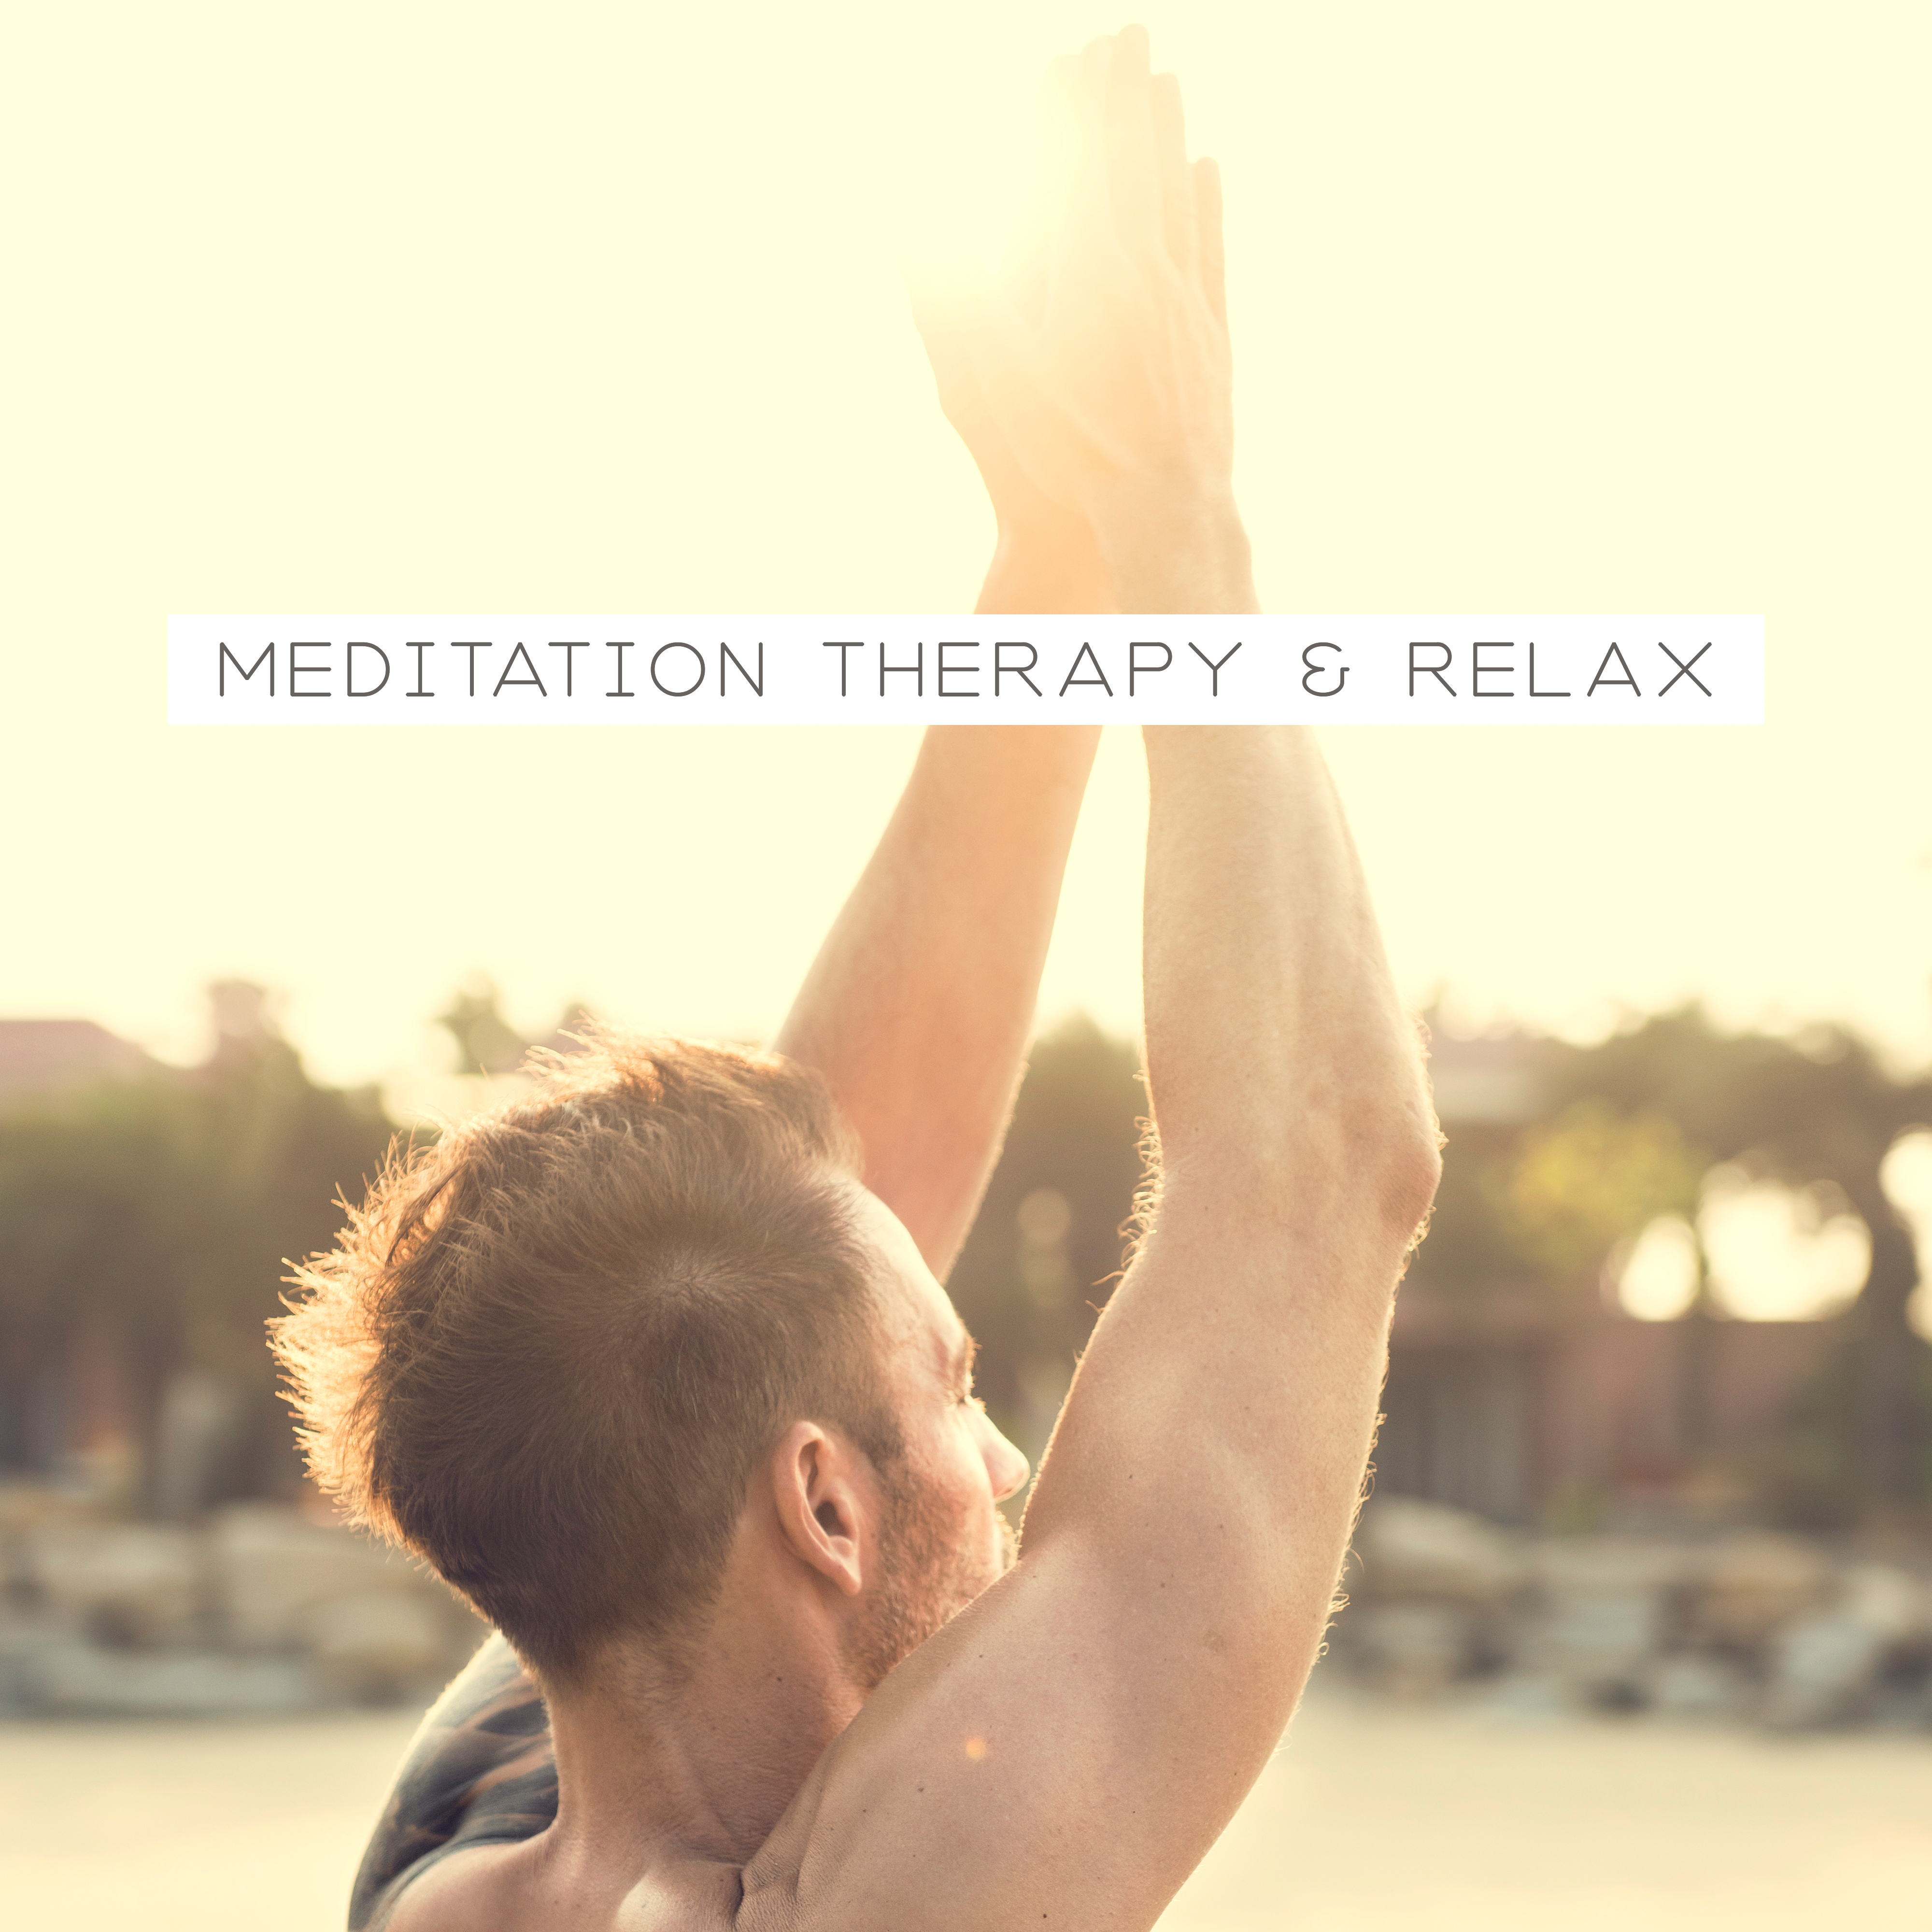 Meditation Therapy & Relax – Yoga Music to Calm Down, Meditation Music Zone, Zen Lounge, Music for Mind, Inner Harmony, Mindfulness Ambient Sounds, Pure Relaxation